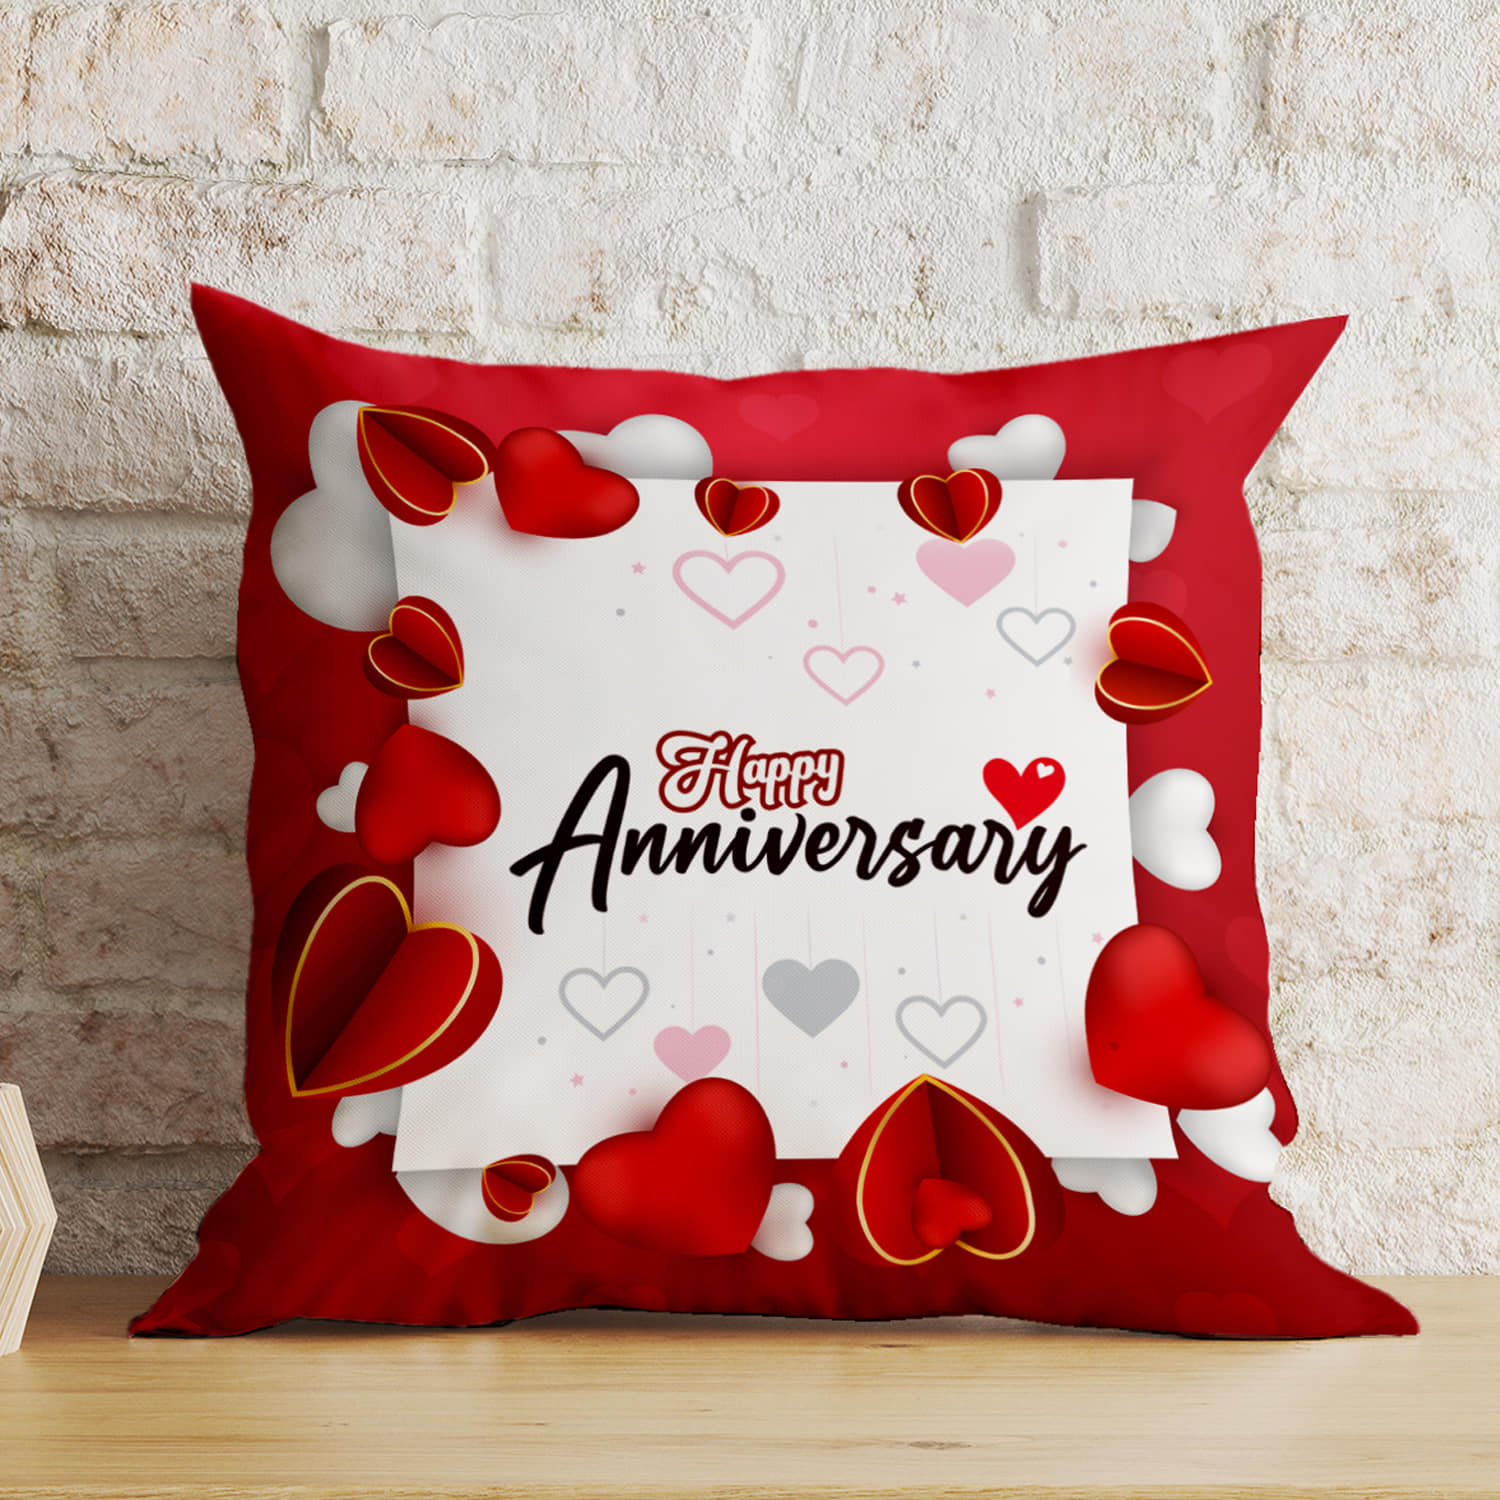 Personalized Anniversary Gifts Online in India For Him & Her | Zoomin